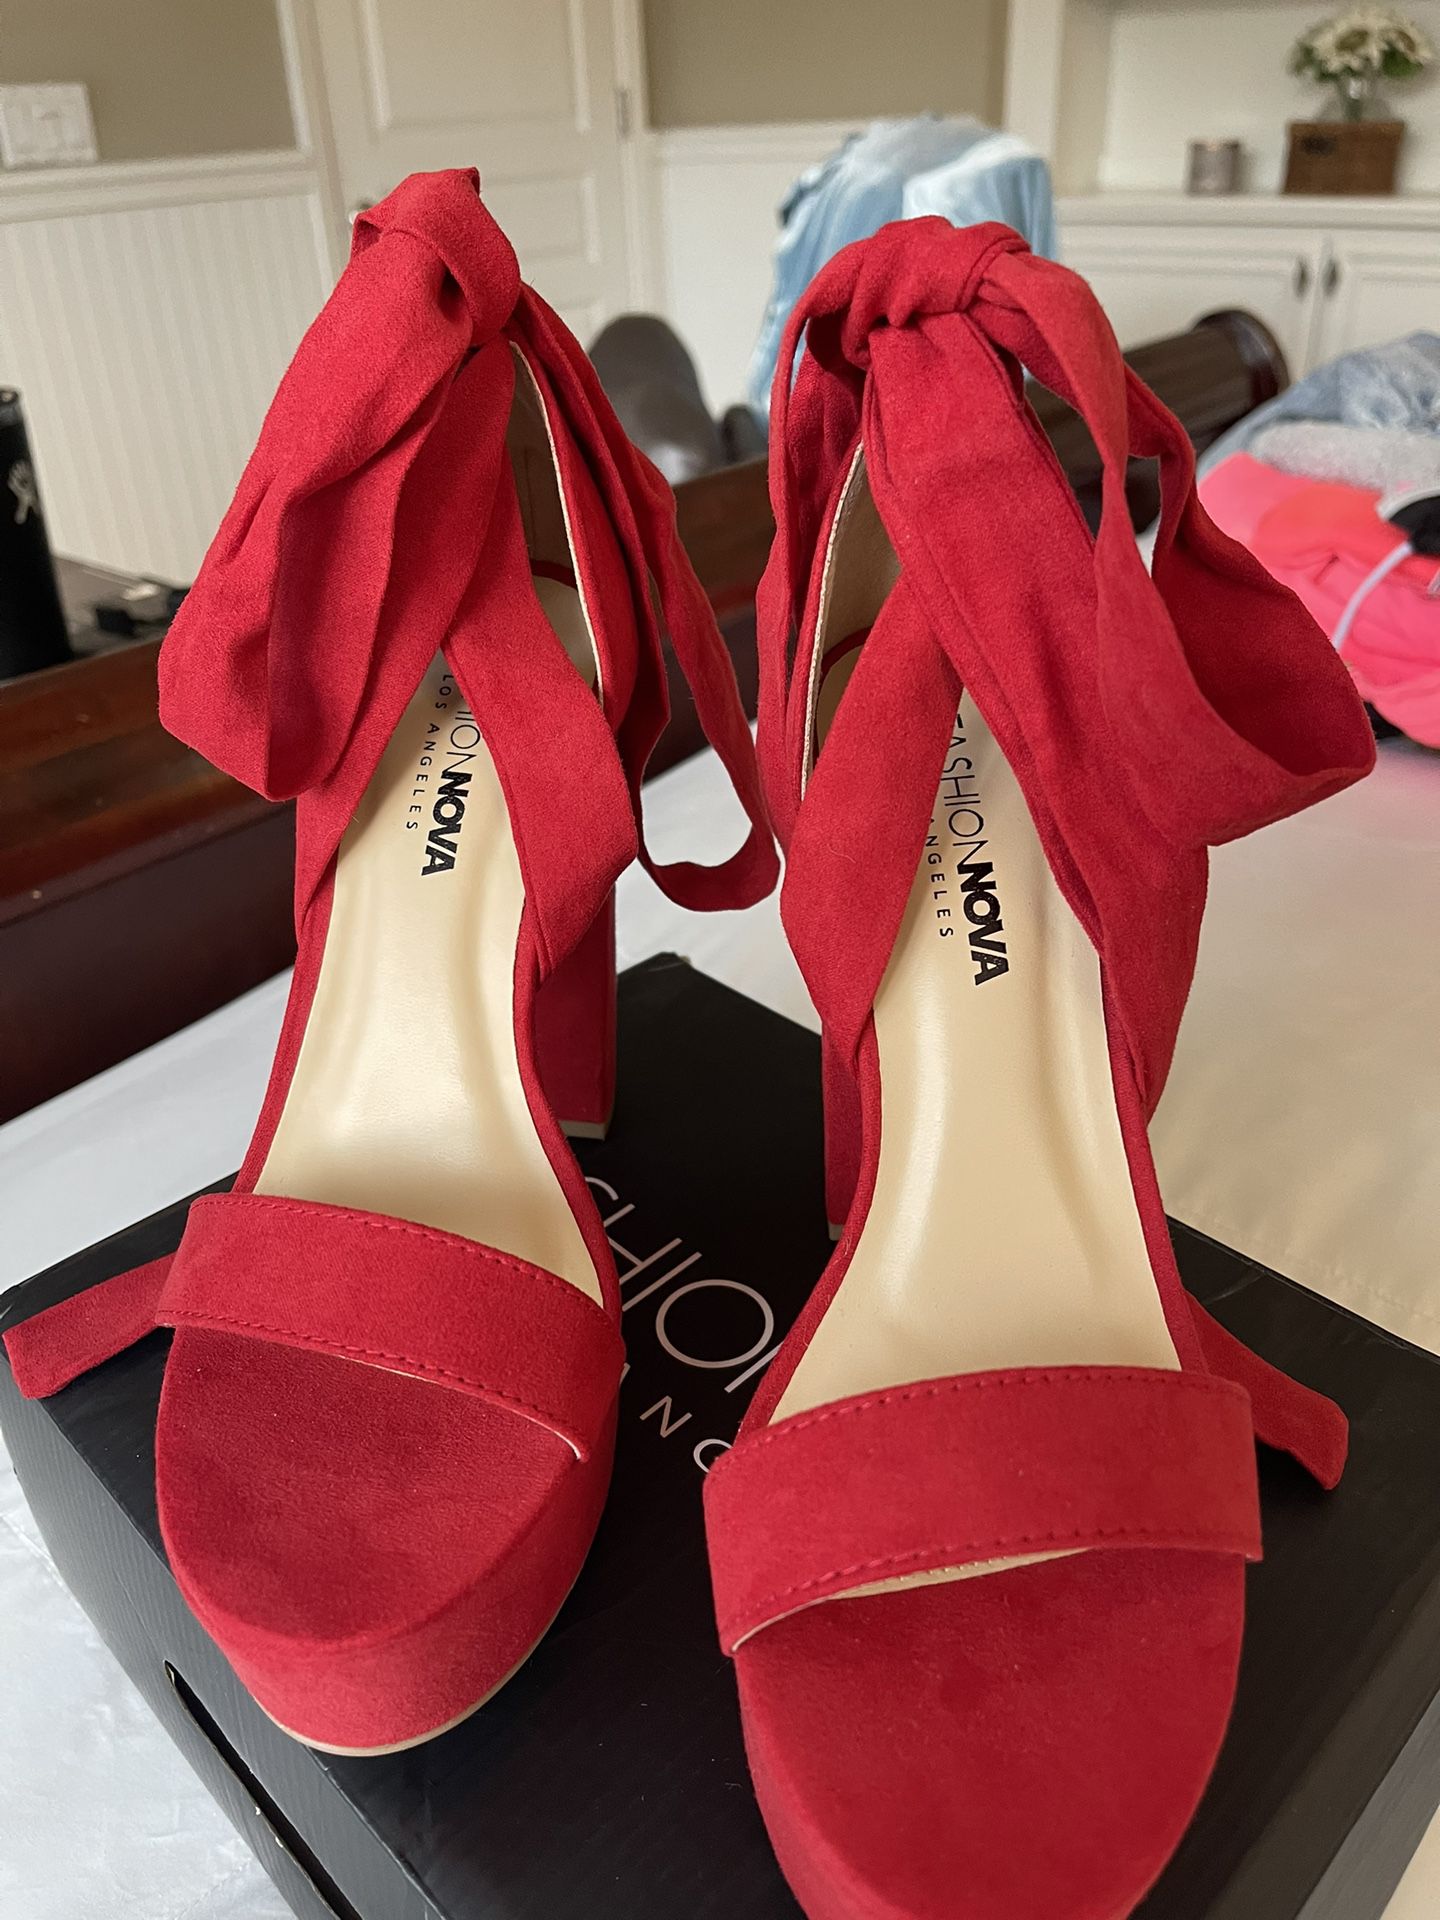 REDUCED! Women’s Size 7 1/2 - Red Lace-up Platform Heels 